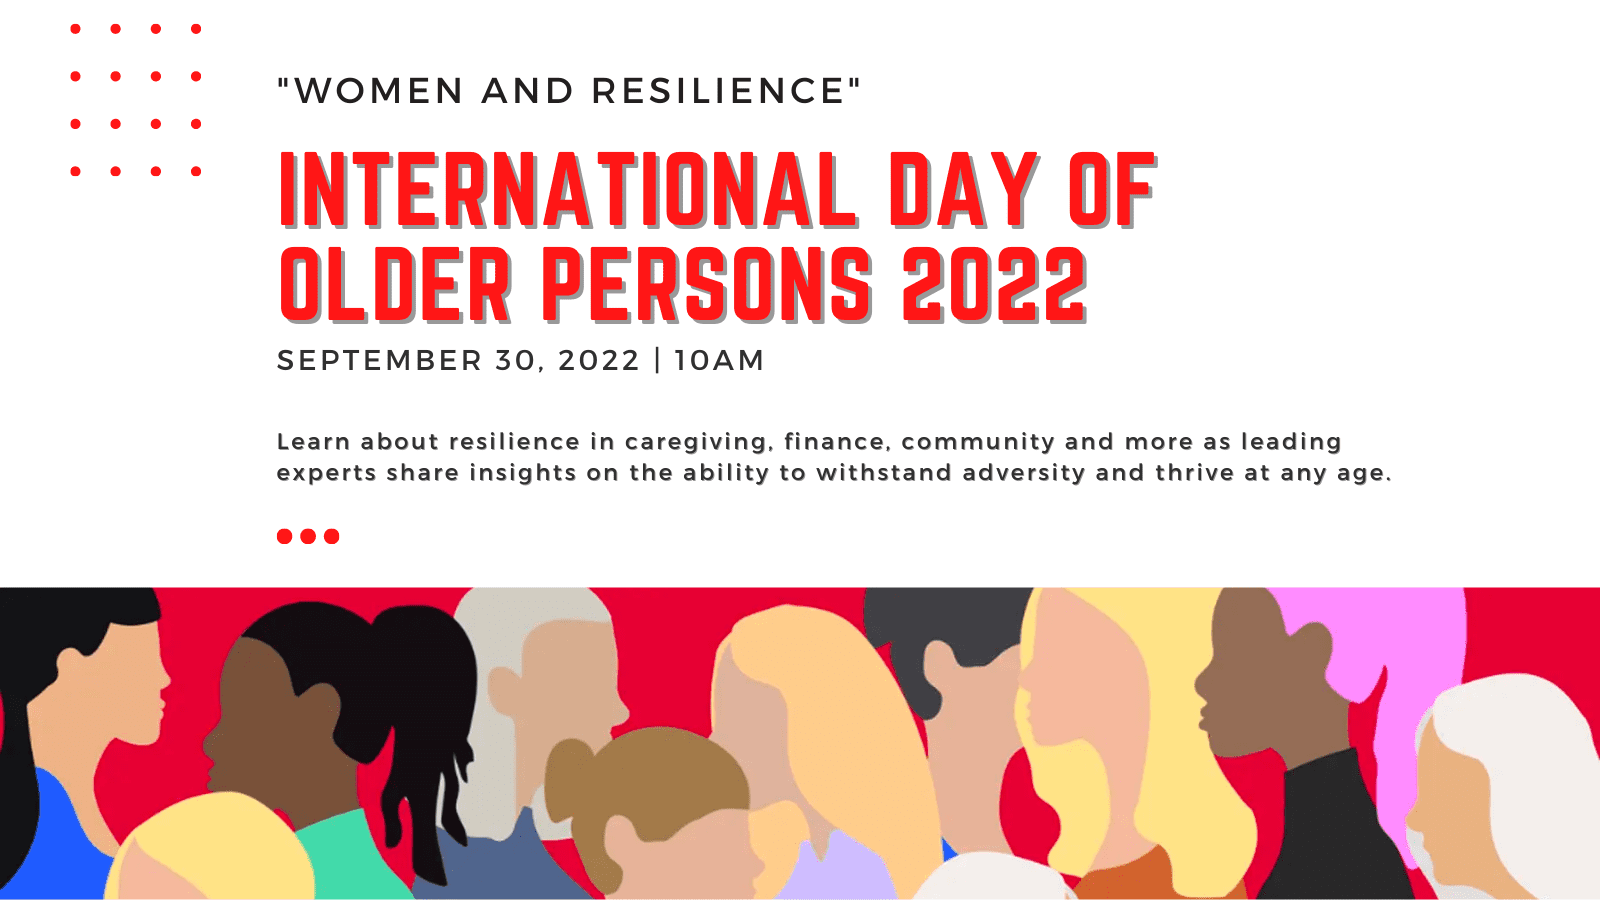 Flyer for International Day of Older Persons 2022: Women and Resilience with vector illustration of many women